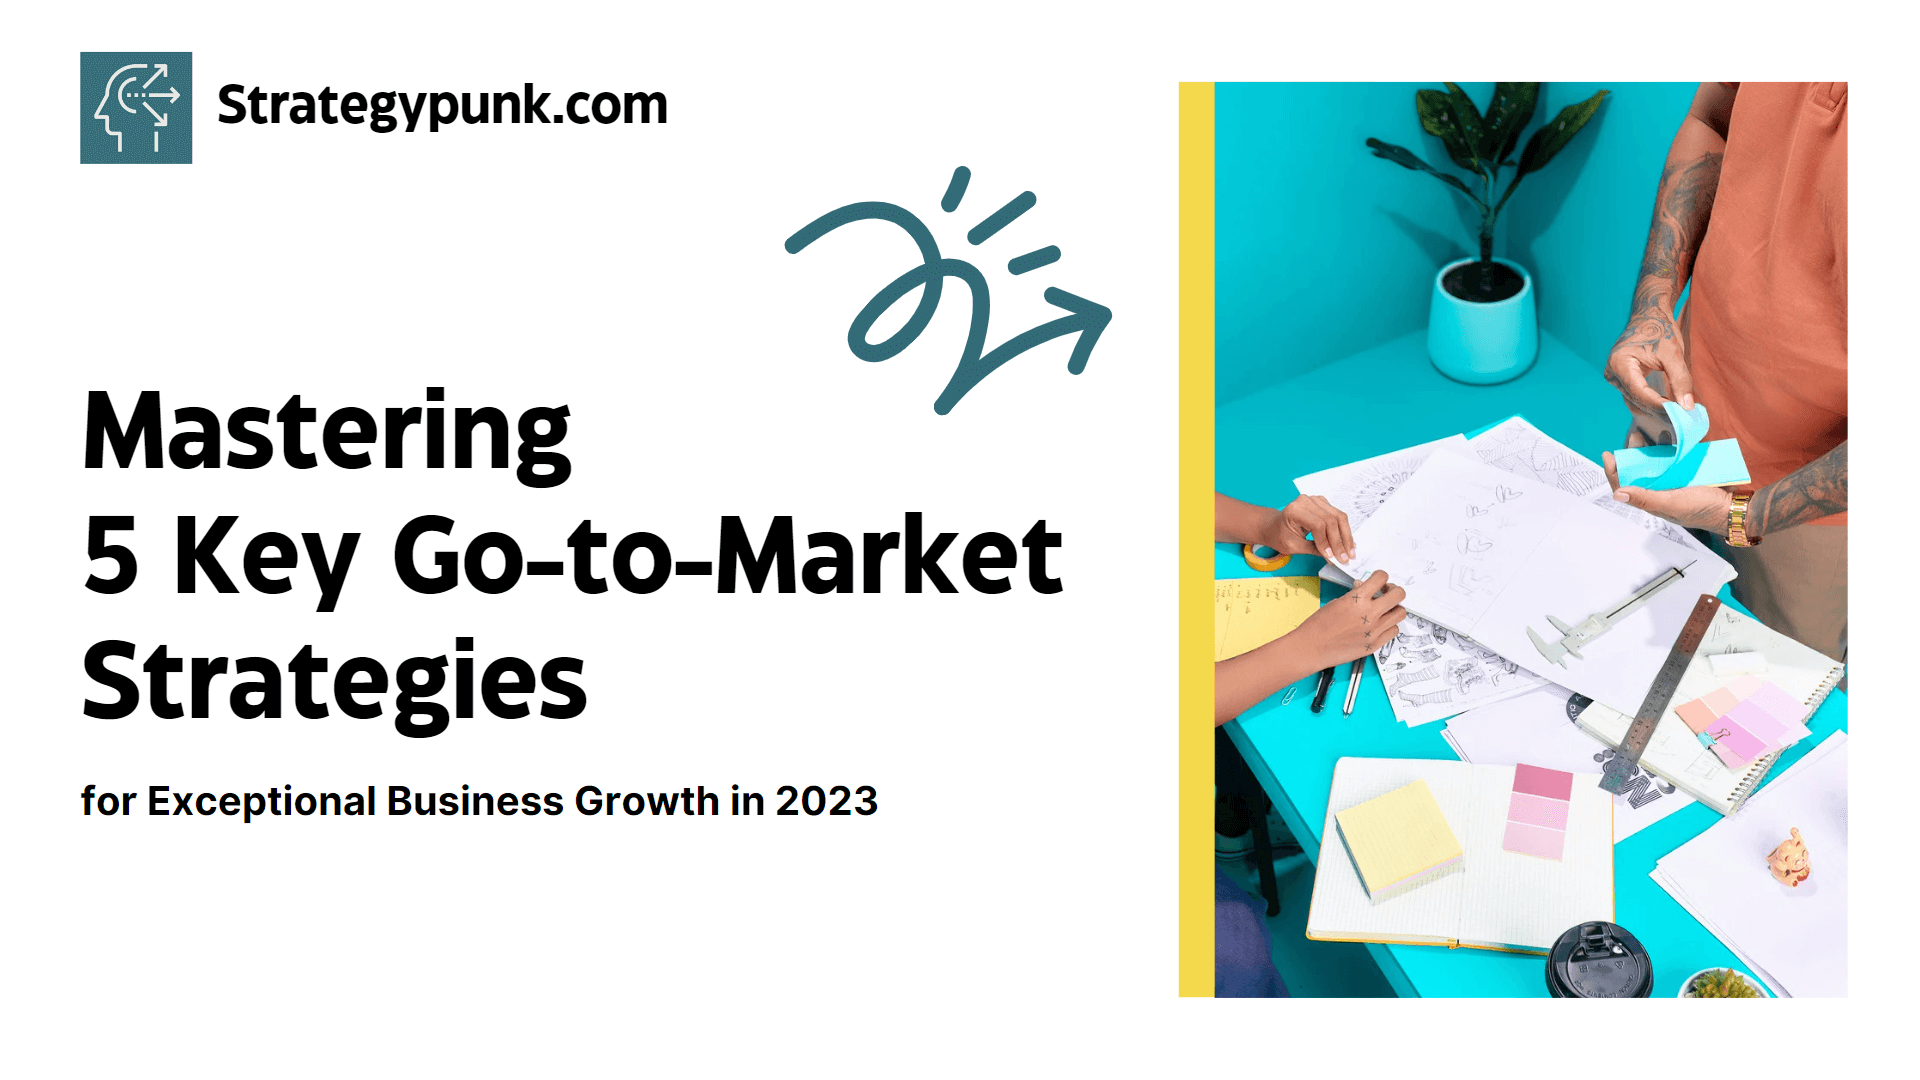 Mastering 5 Key Go-to-Market Strategies for Exceptional Business Growth